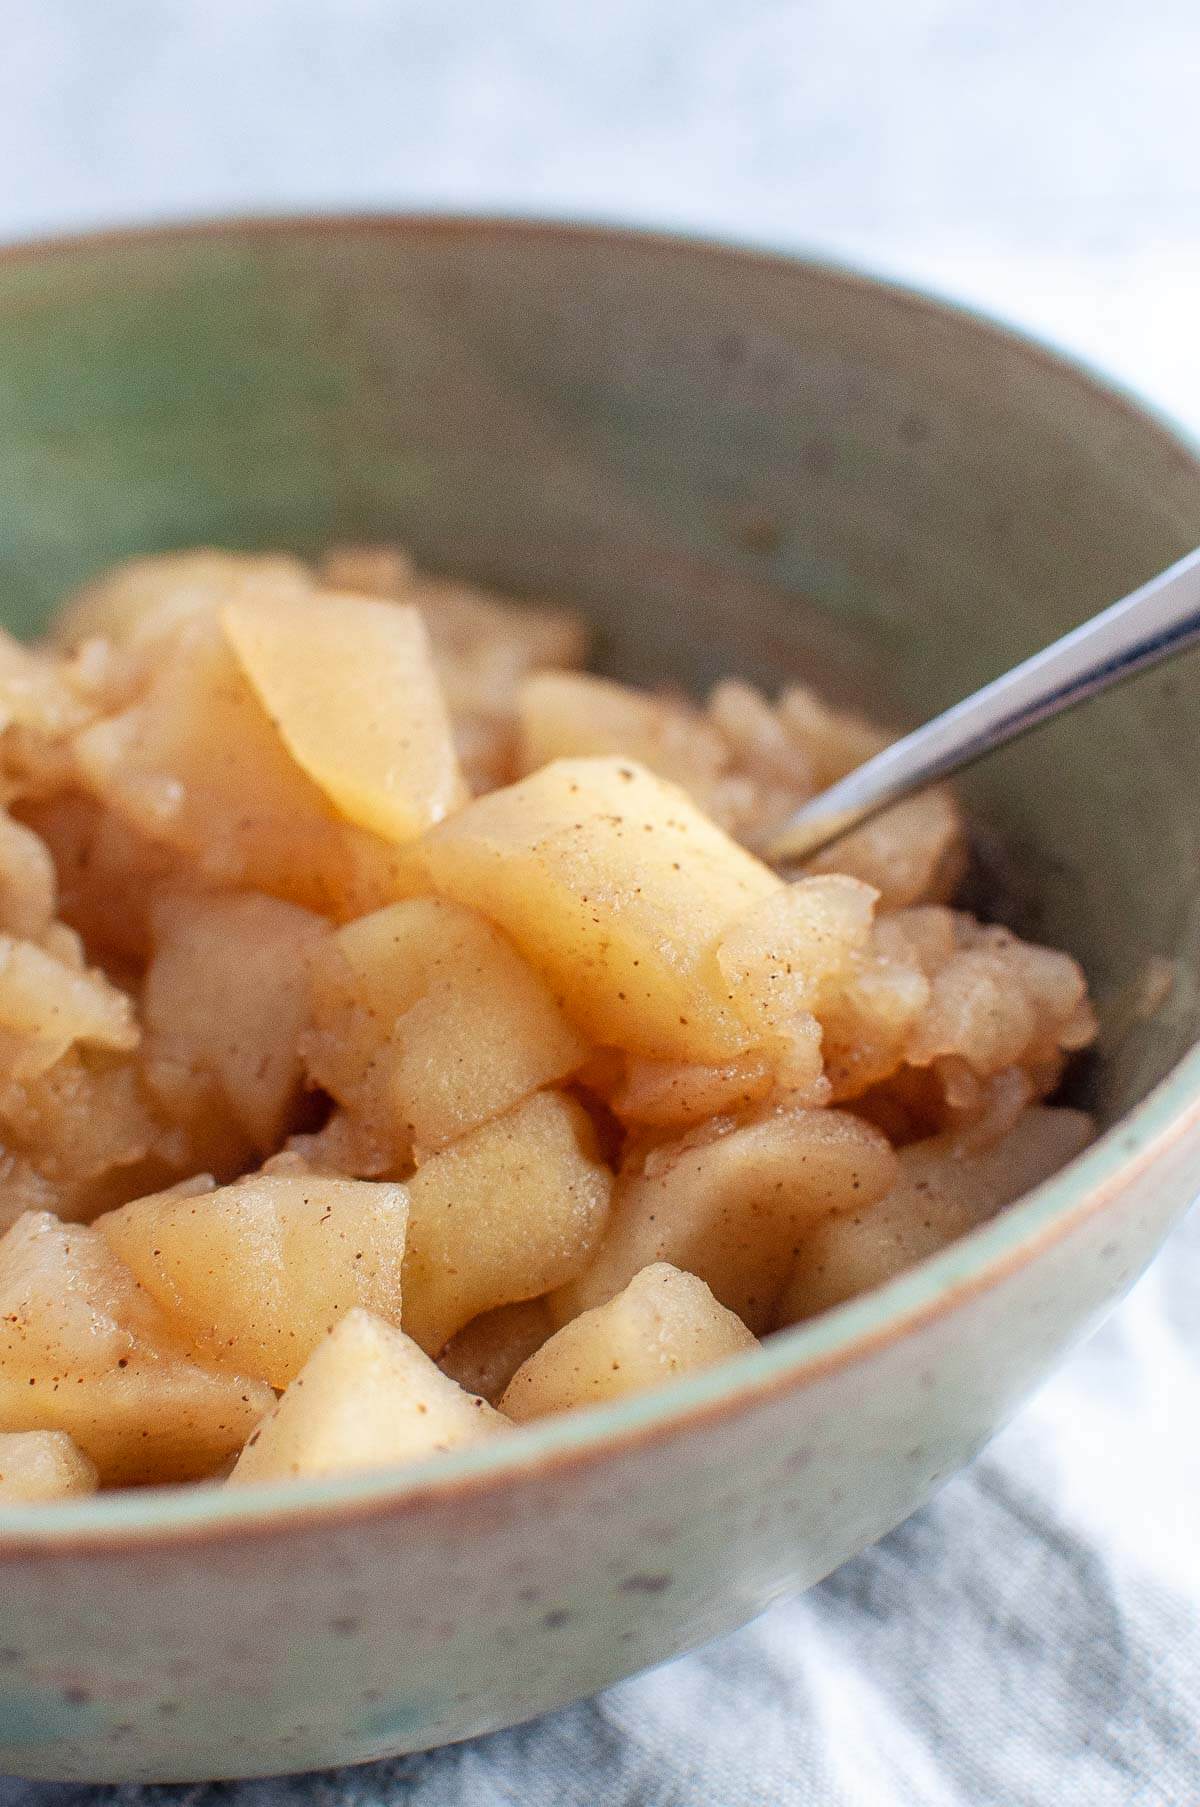 stewed apples in a bowl with a spoon